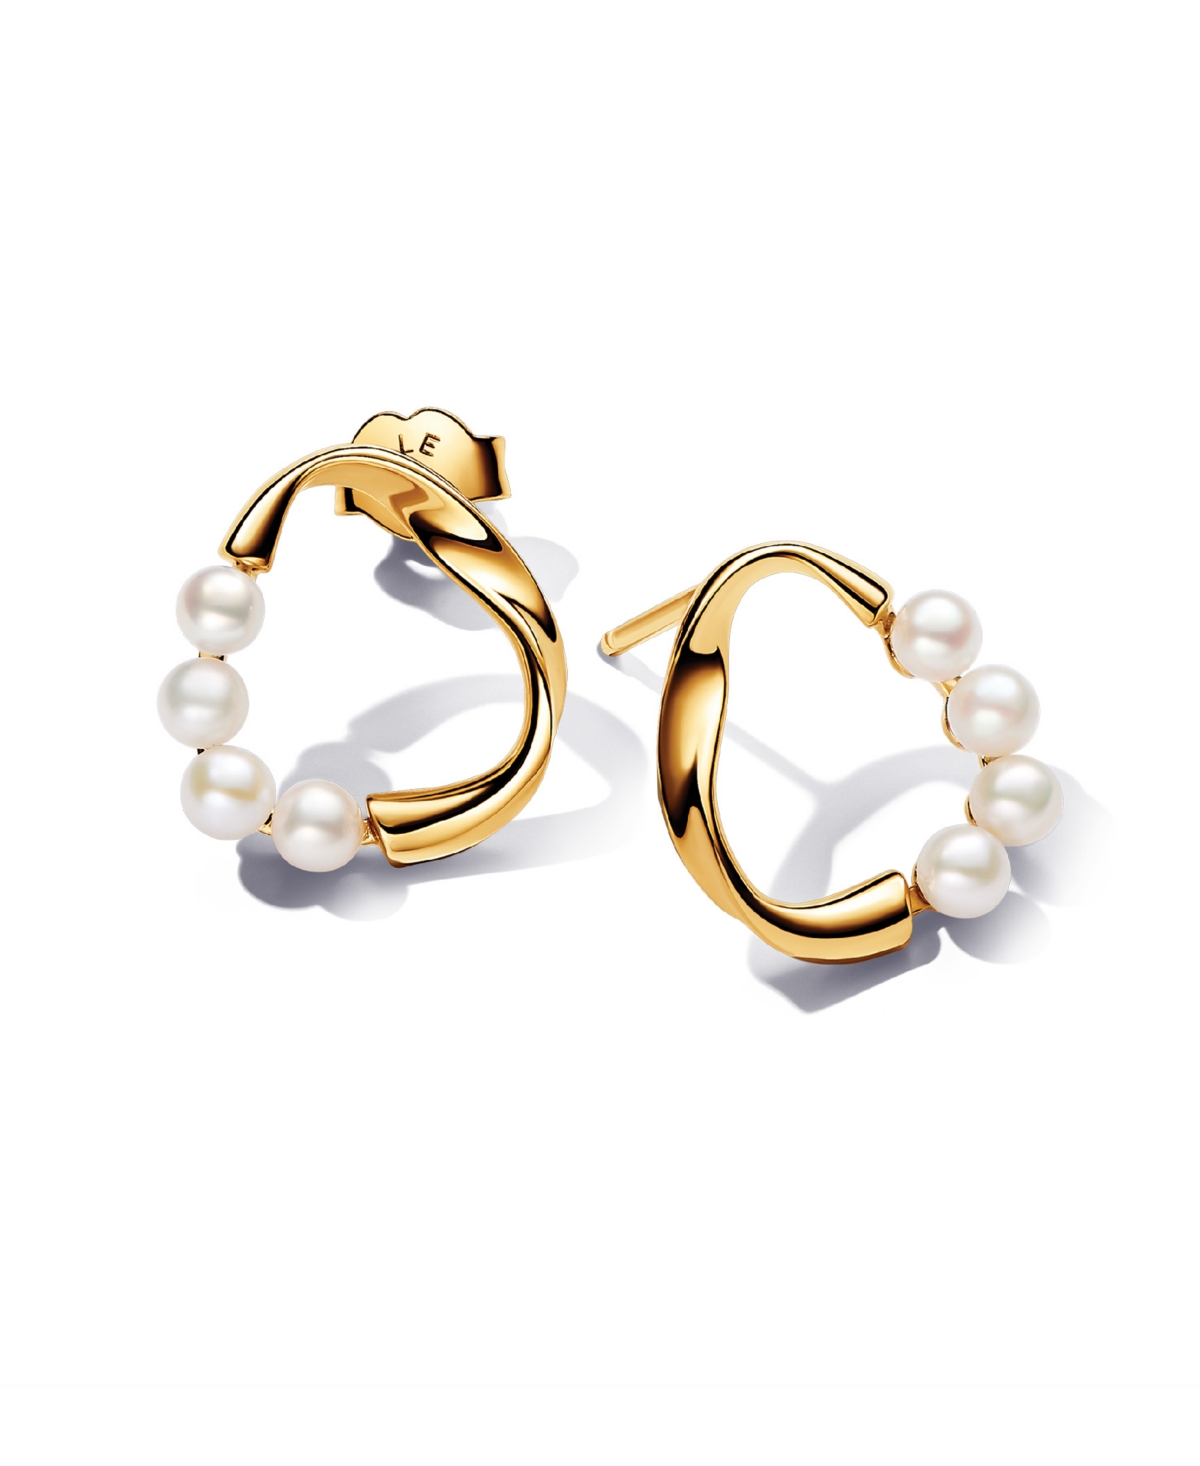 14k gold-plated Shaped Circle Treated Freshwater Cultured Pearls Stud Earrings